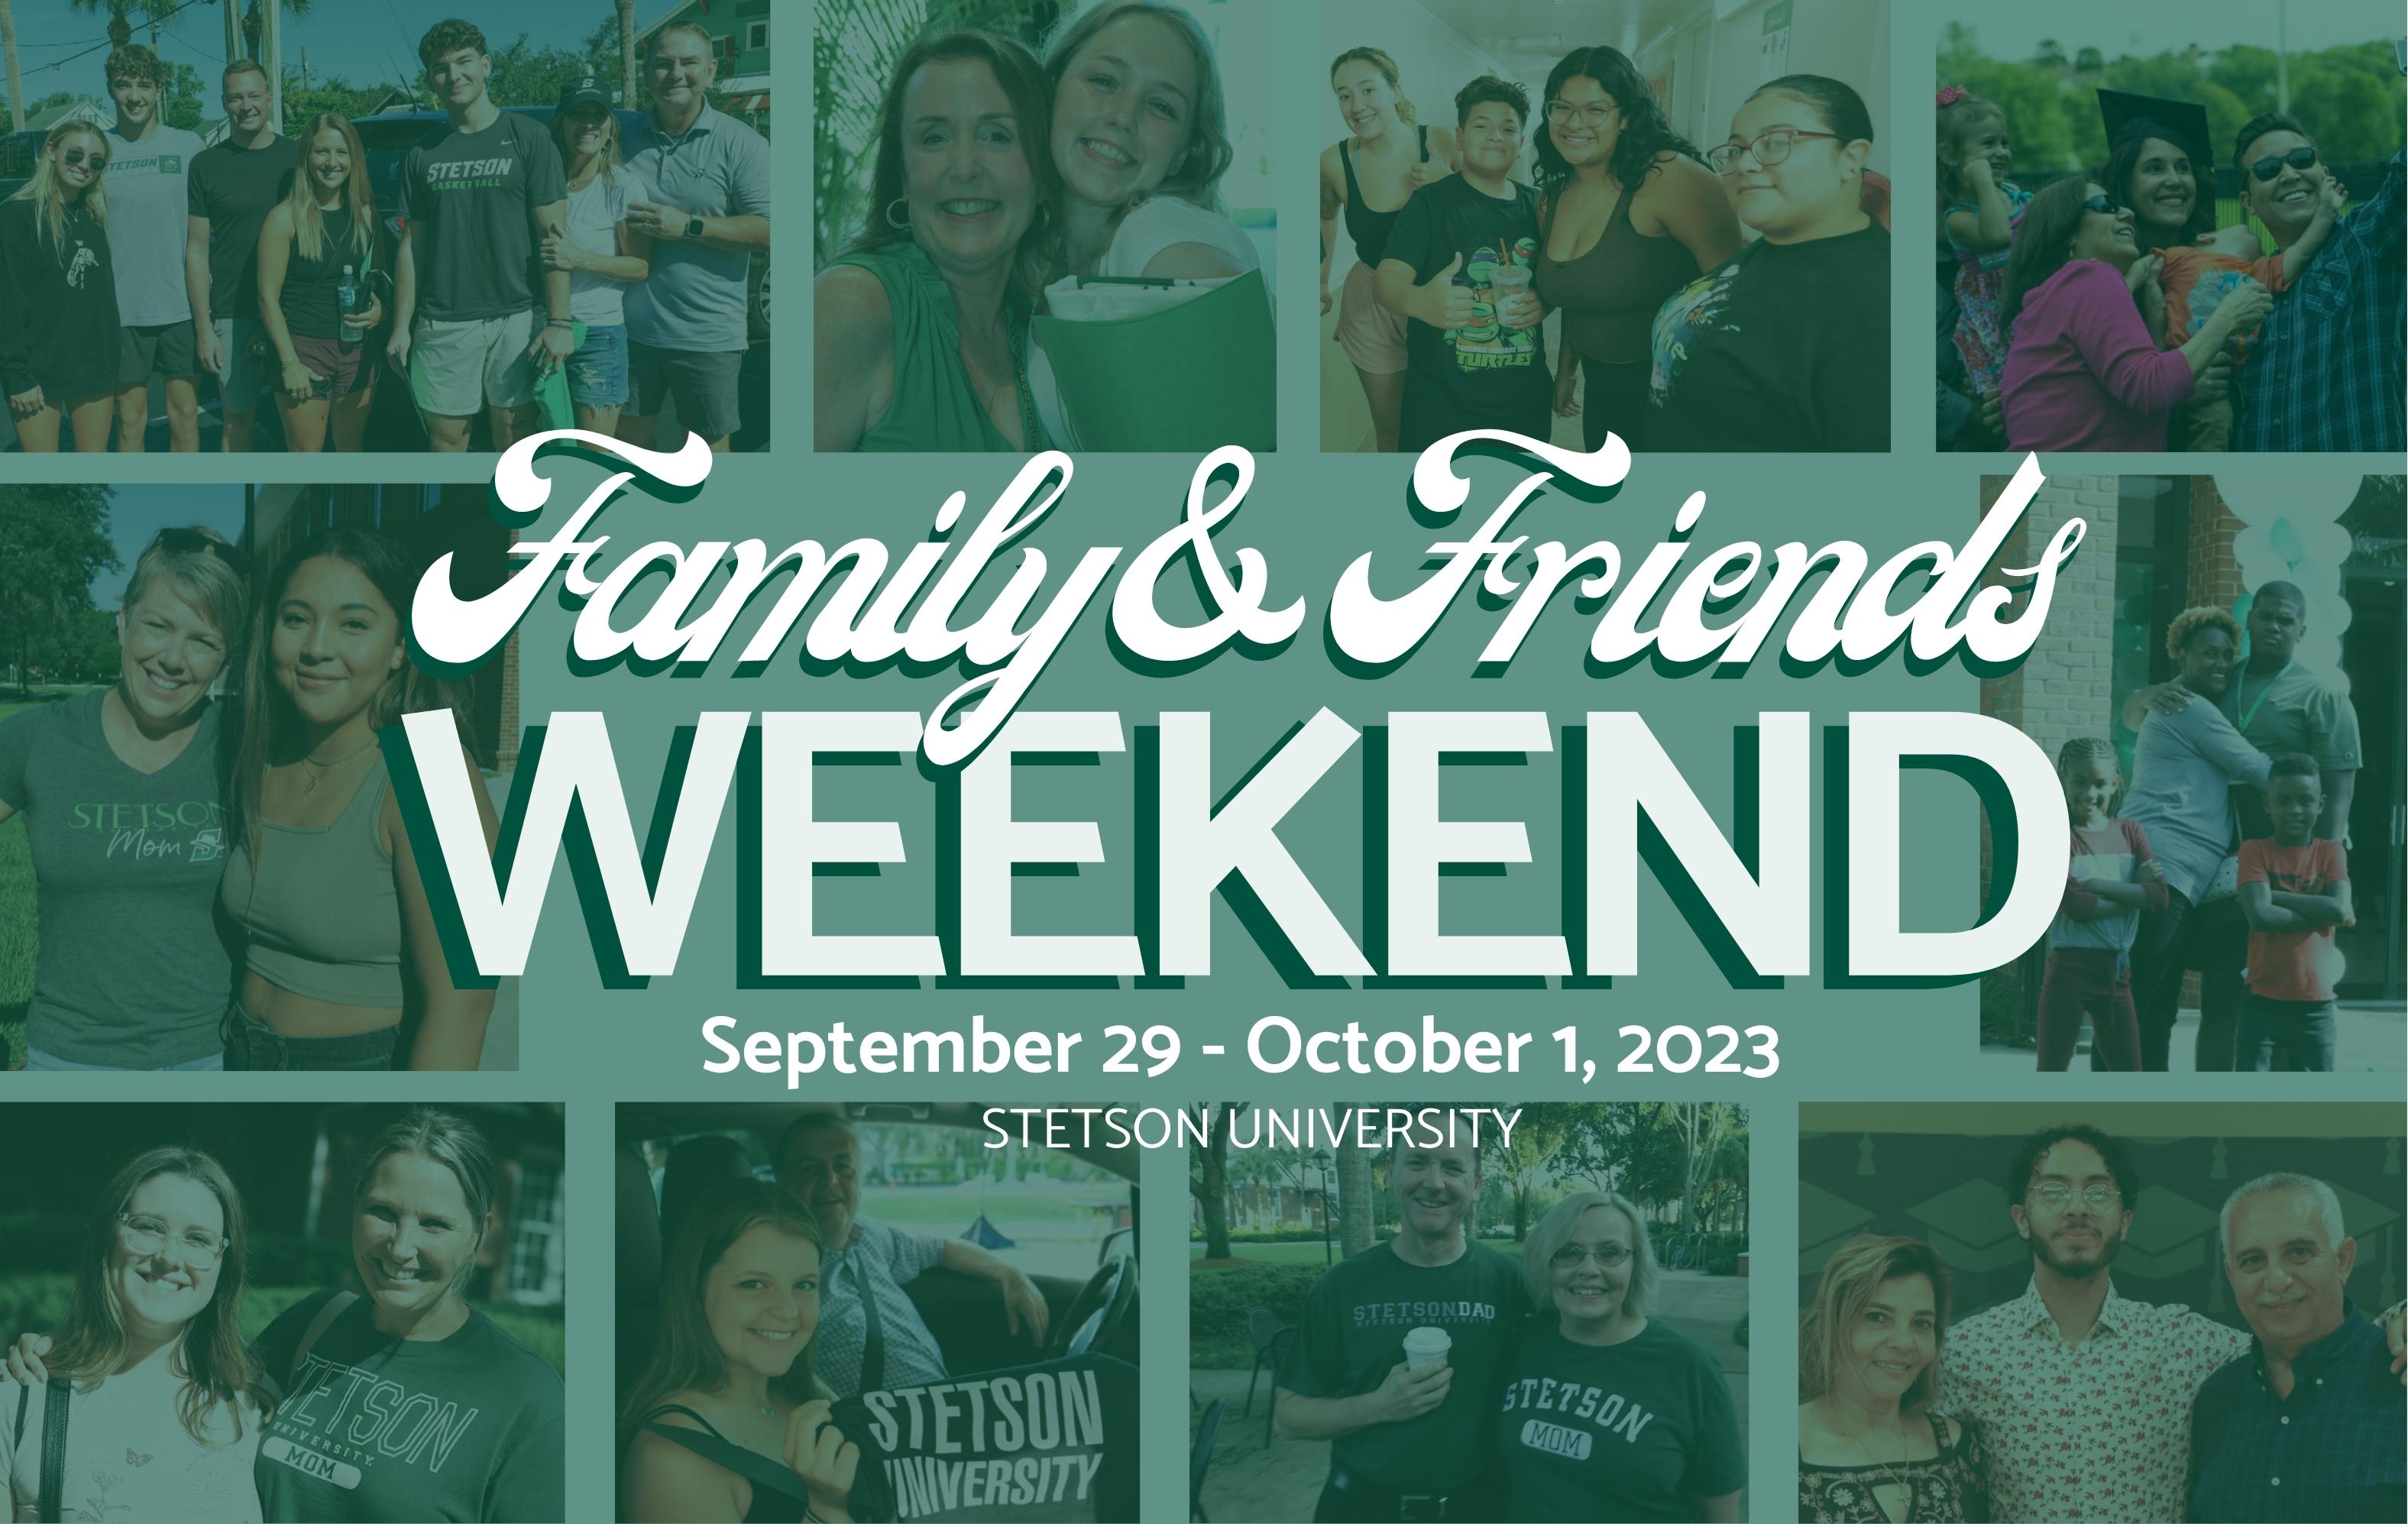 Friends and Family at Stetson University from september 29 to october 1